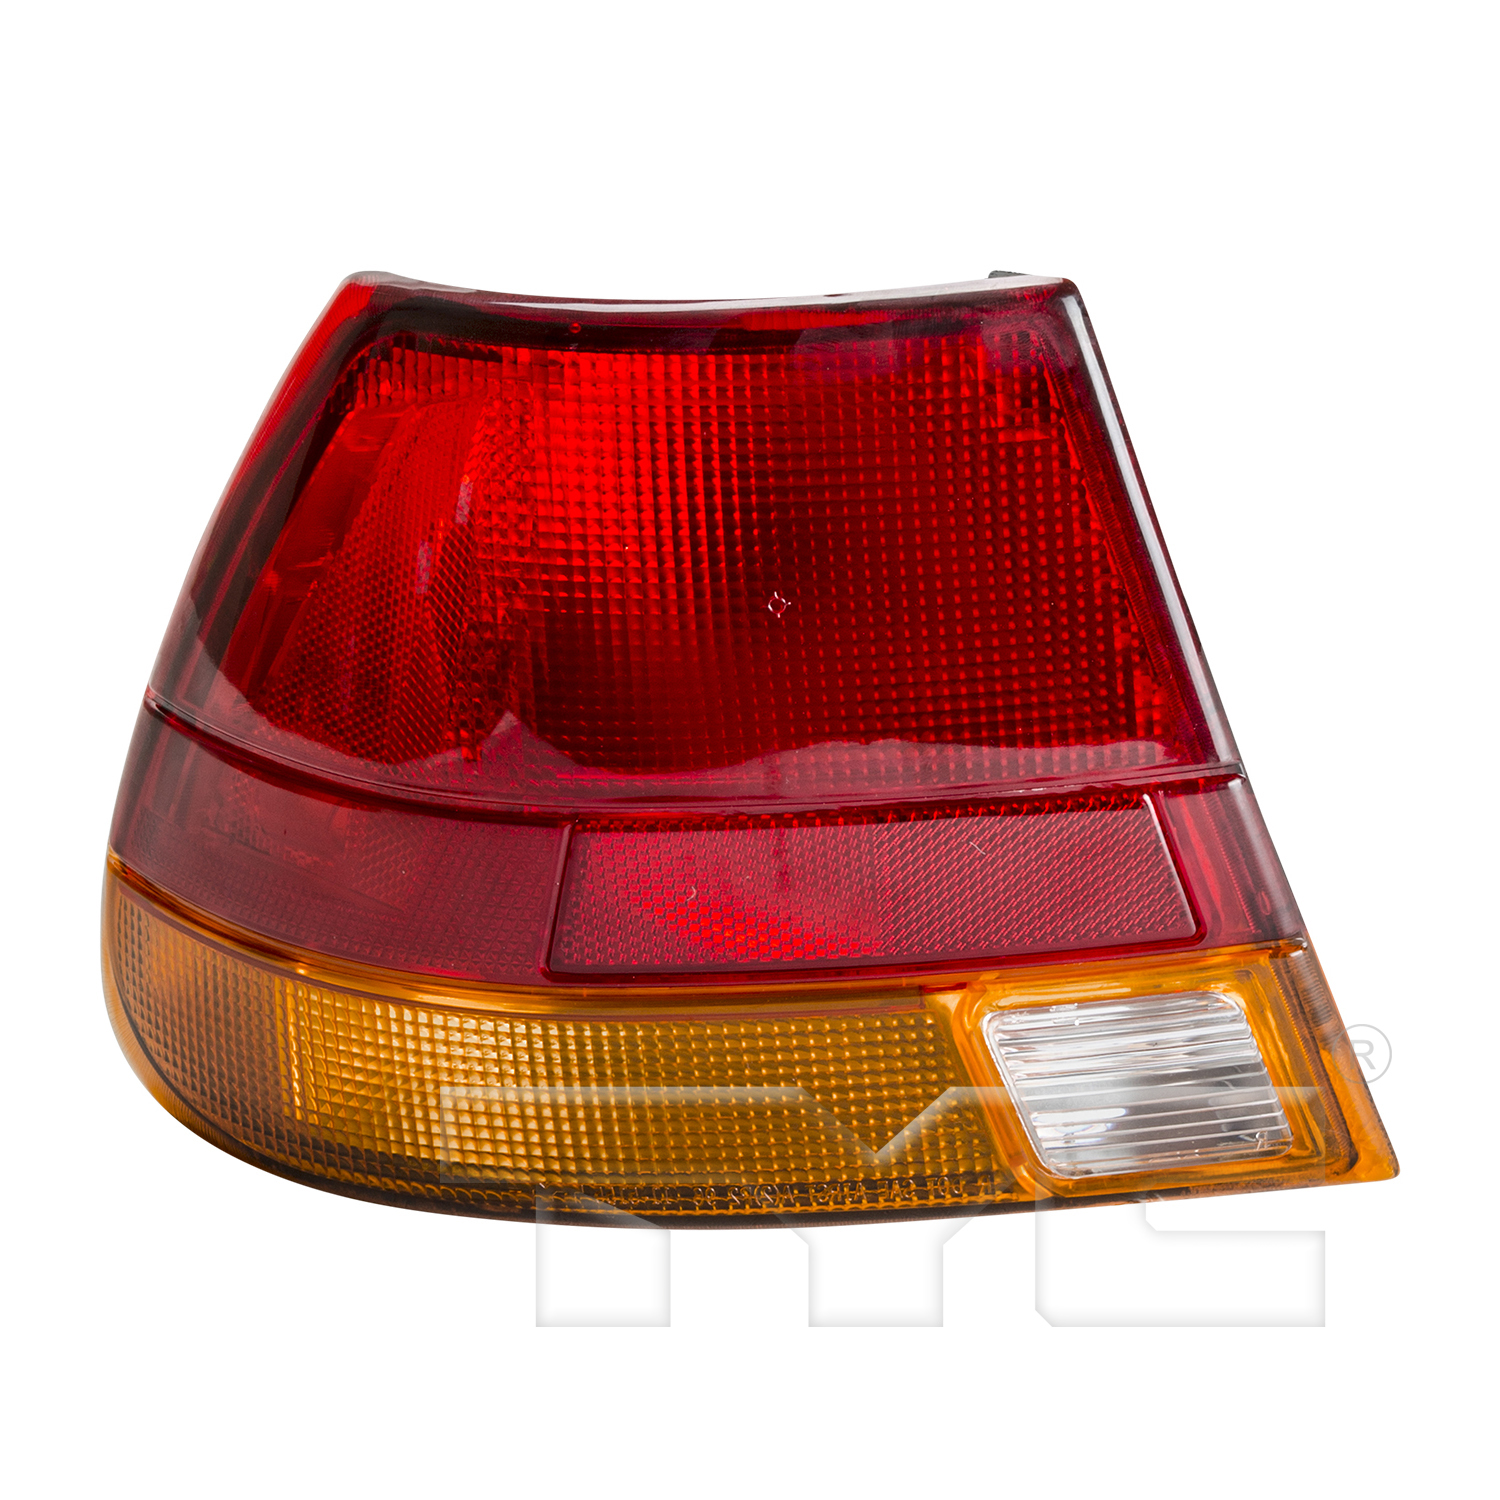 Aftermarket TAILLIGHTS for SATURN - SL1, SL1,96-97,LT Taillamp lens/housing